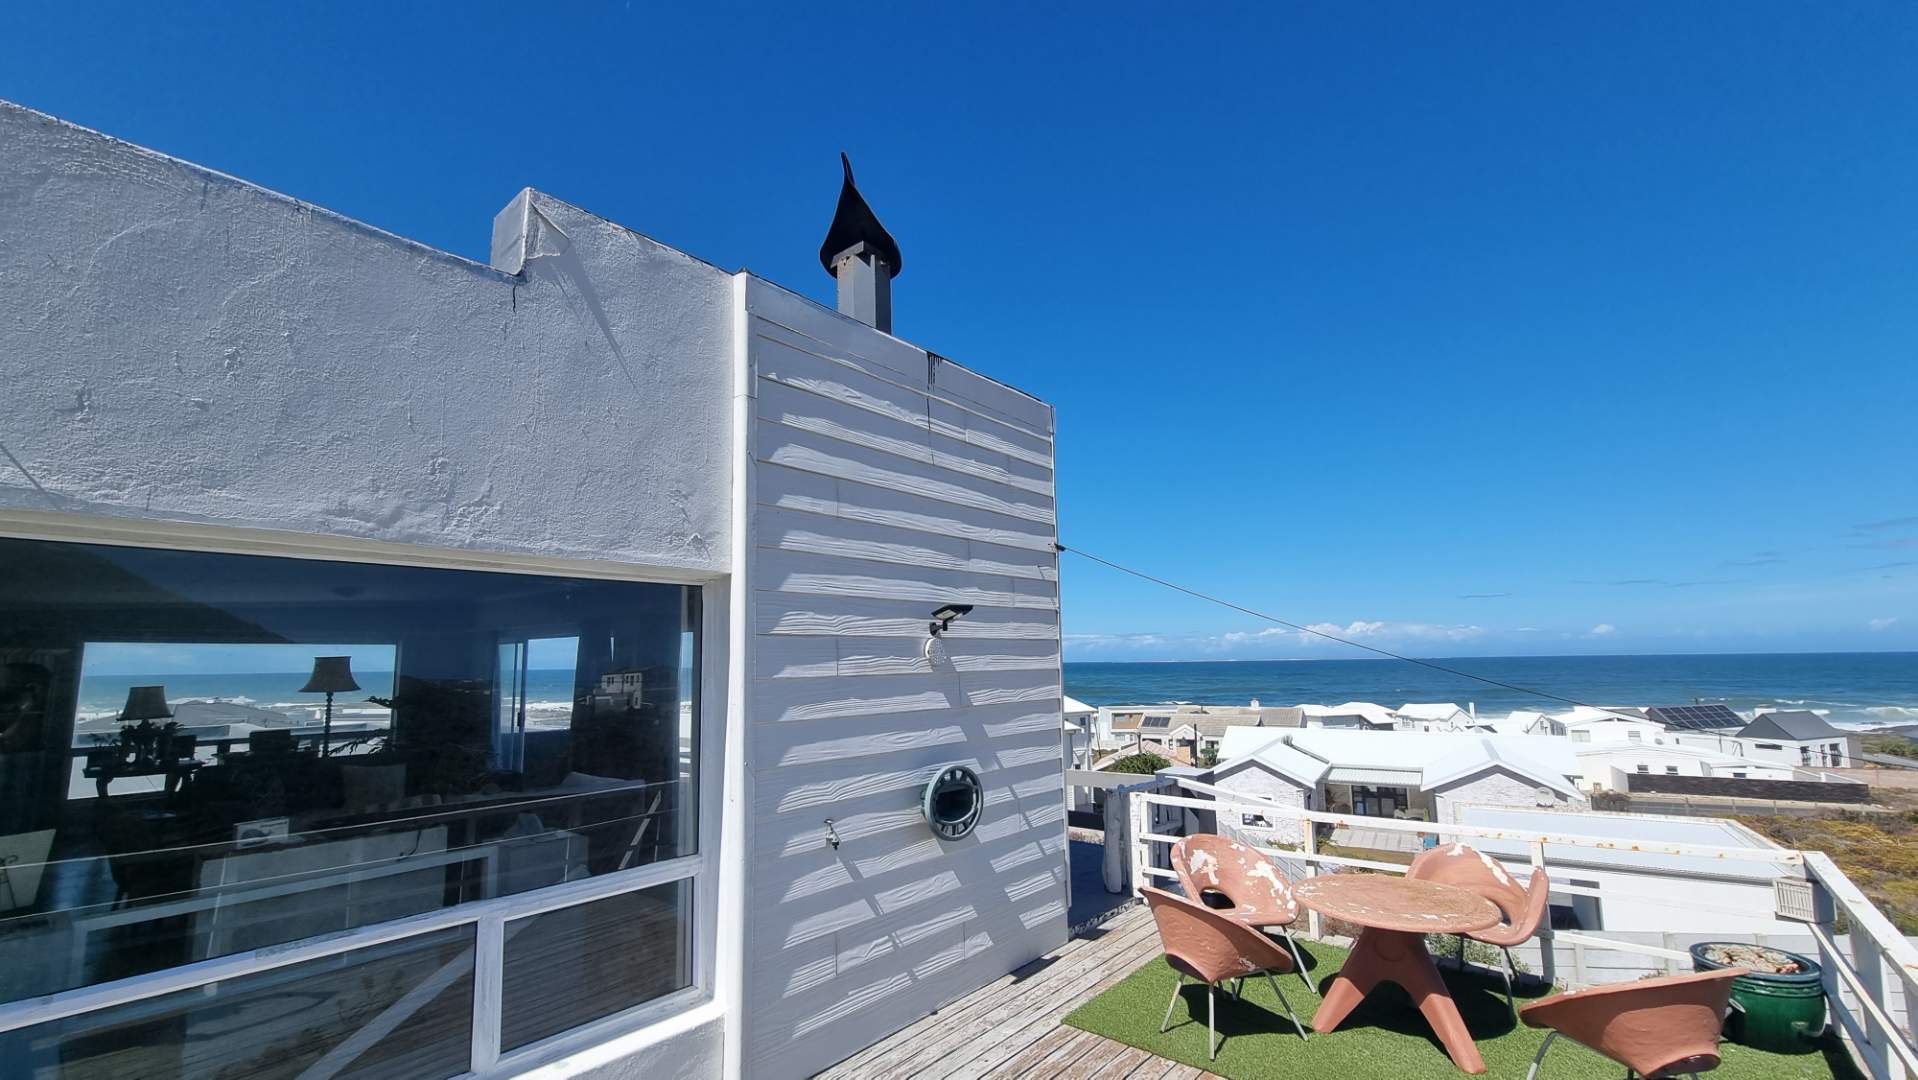 4 Bedroom Property for Sale in Yzerfontein Western Cape